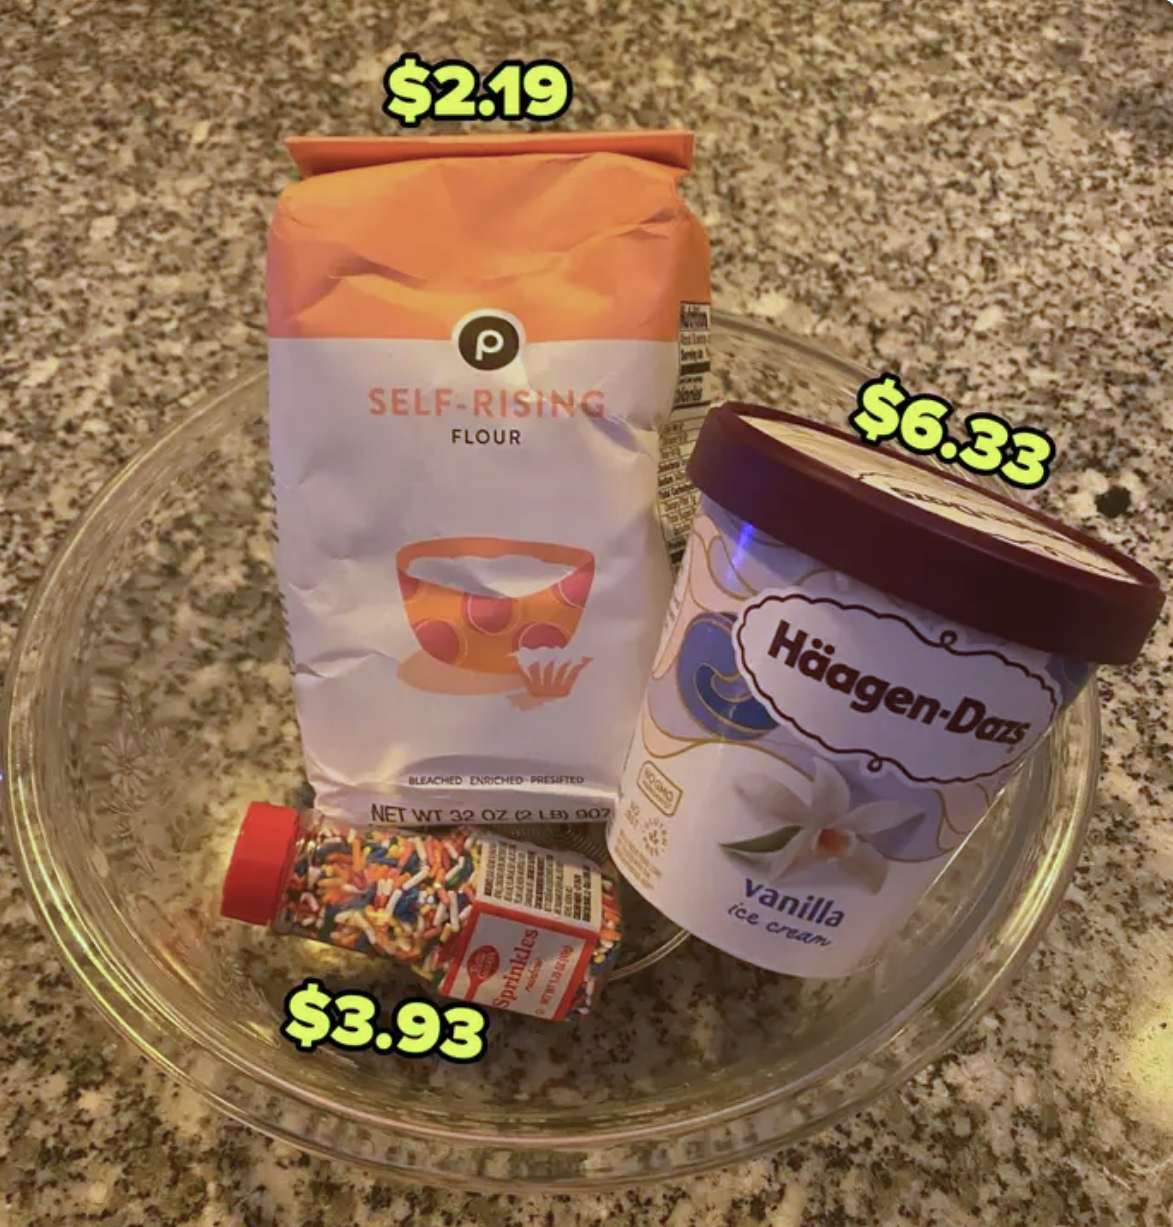 self-rising flour for $2.19, pint of vanilla ice cream for $6.33, and sprinkles for $3.93